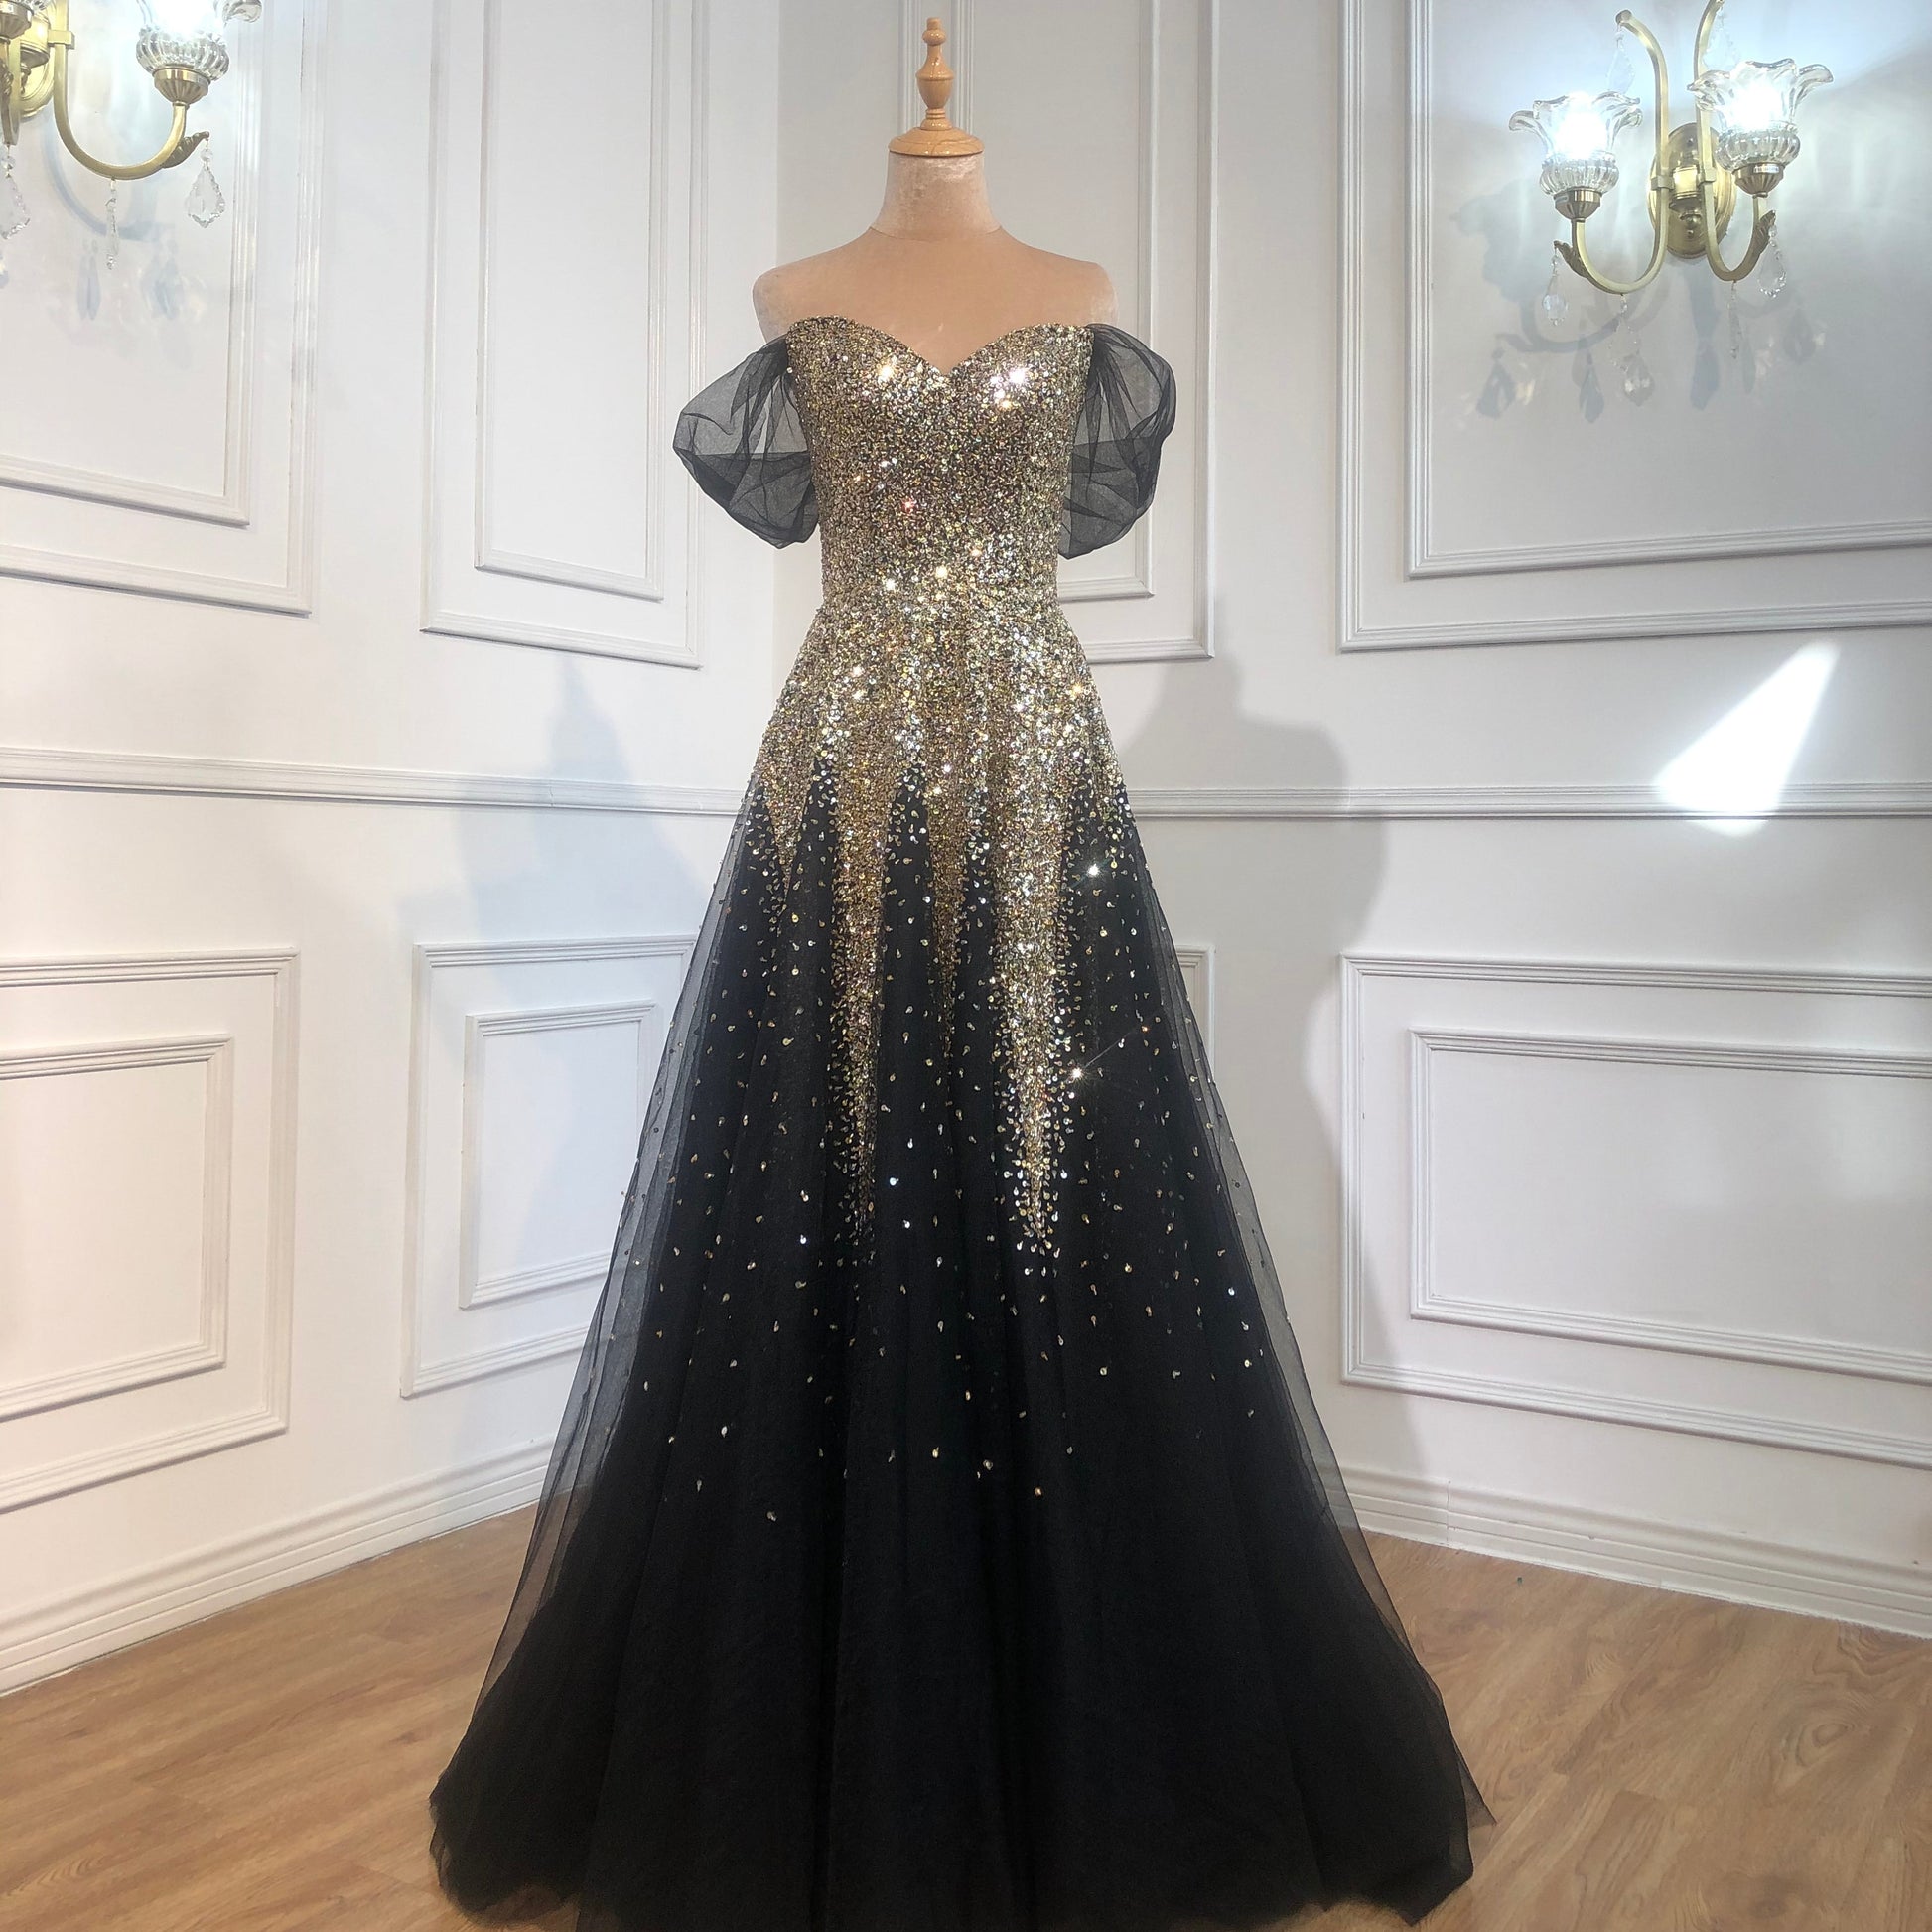 Black Gold A-line Luxury Evening Dresses Gowns 2021 Sparkle Beading Sexy For Women Party Dress - LiveTrendsX